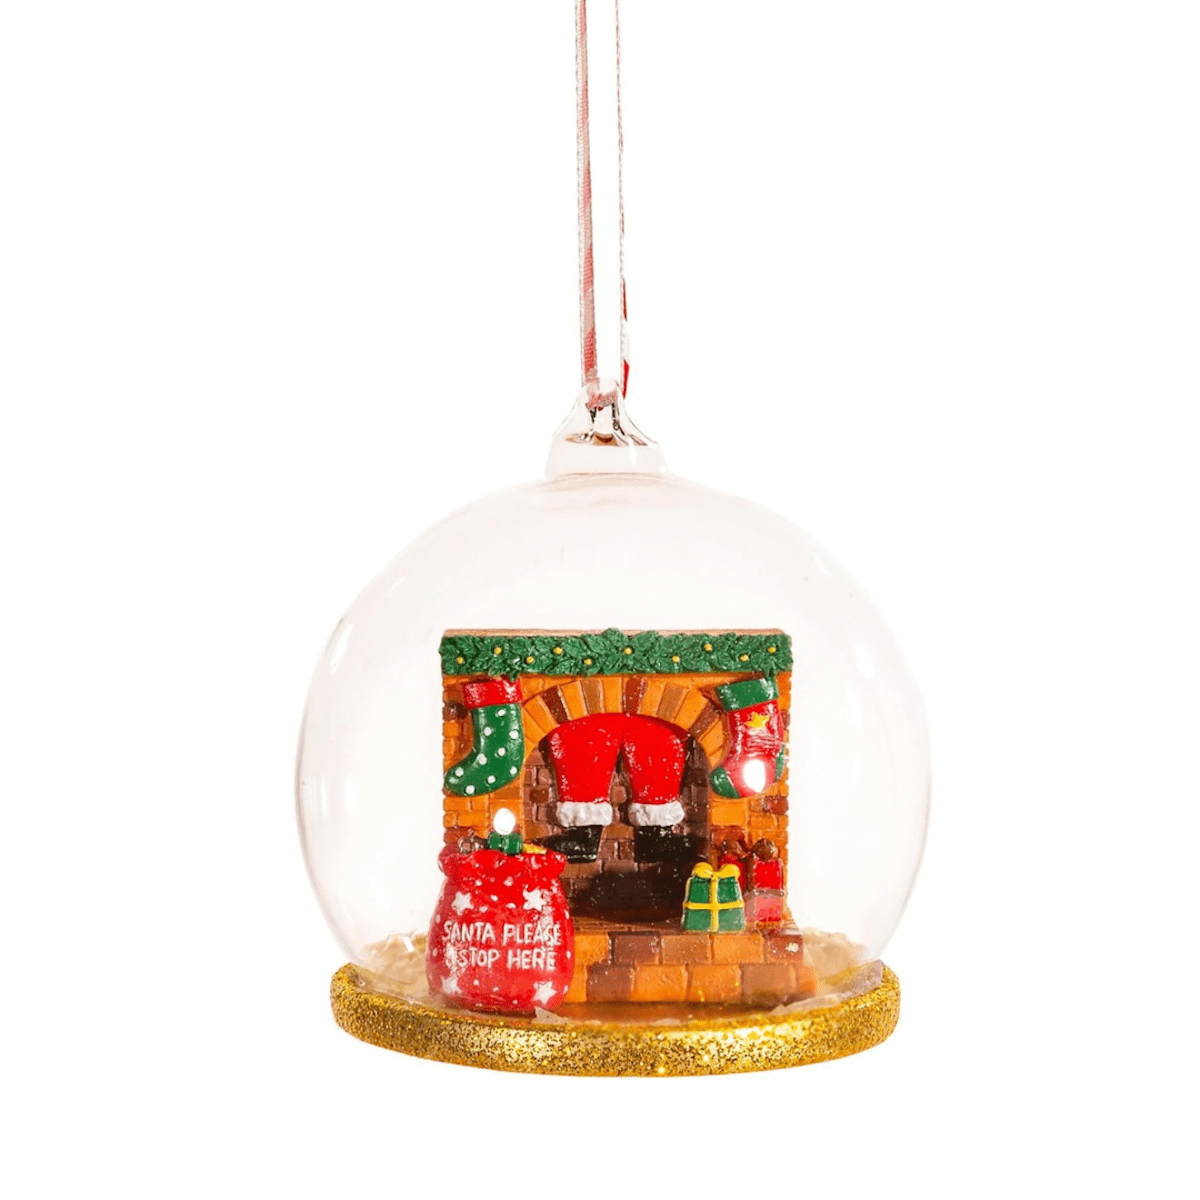 Sass & Belle Christmas Christmas Decorations Santa in Chimney Bauble Christmas Tree Decoration